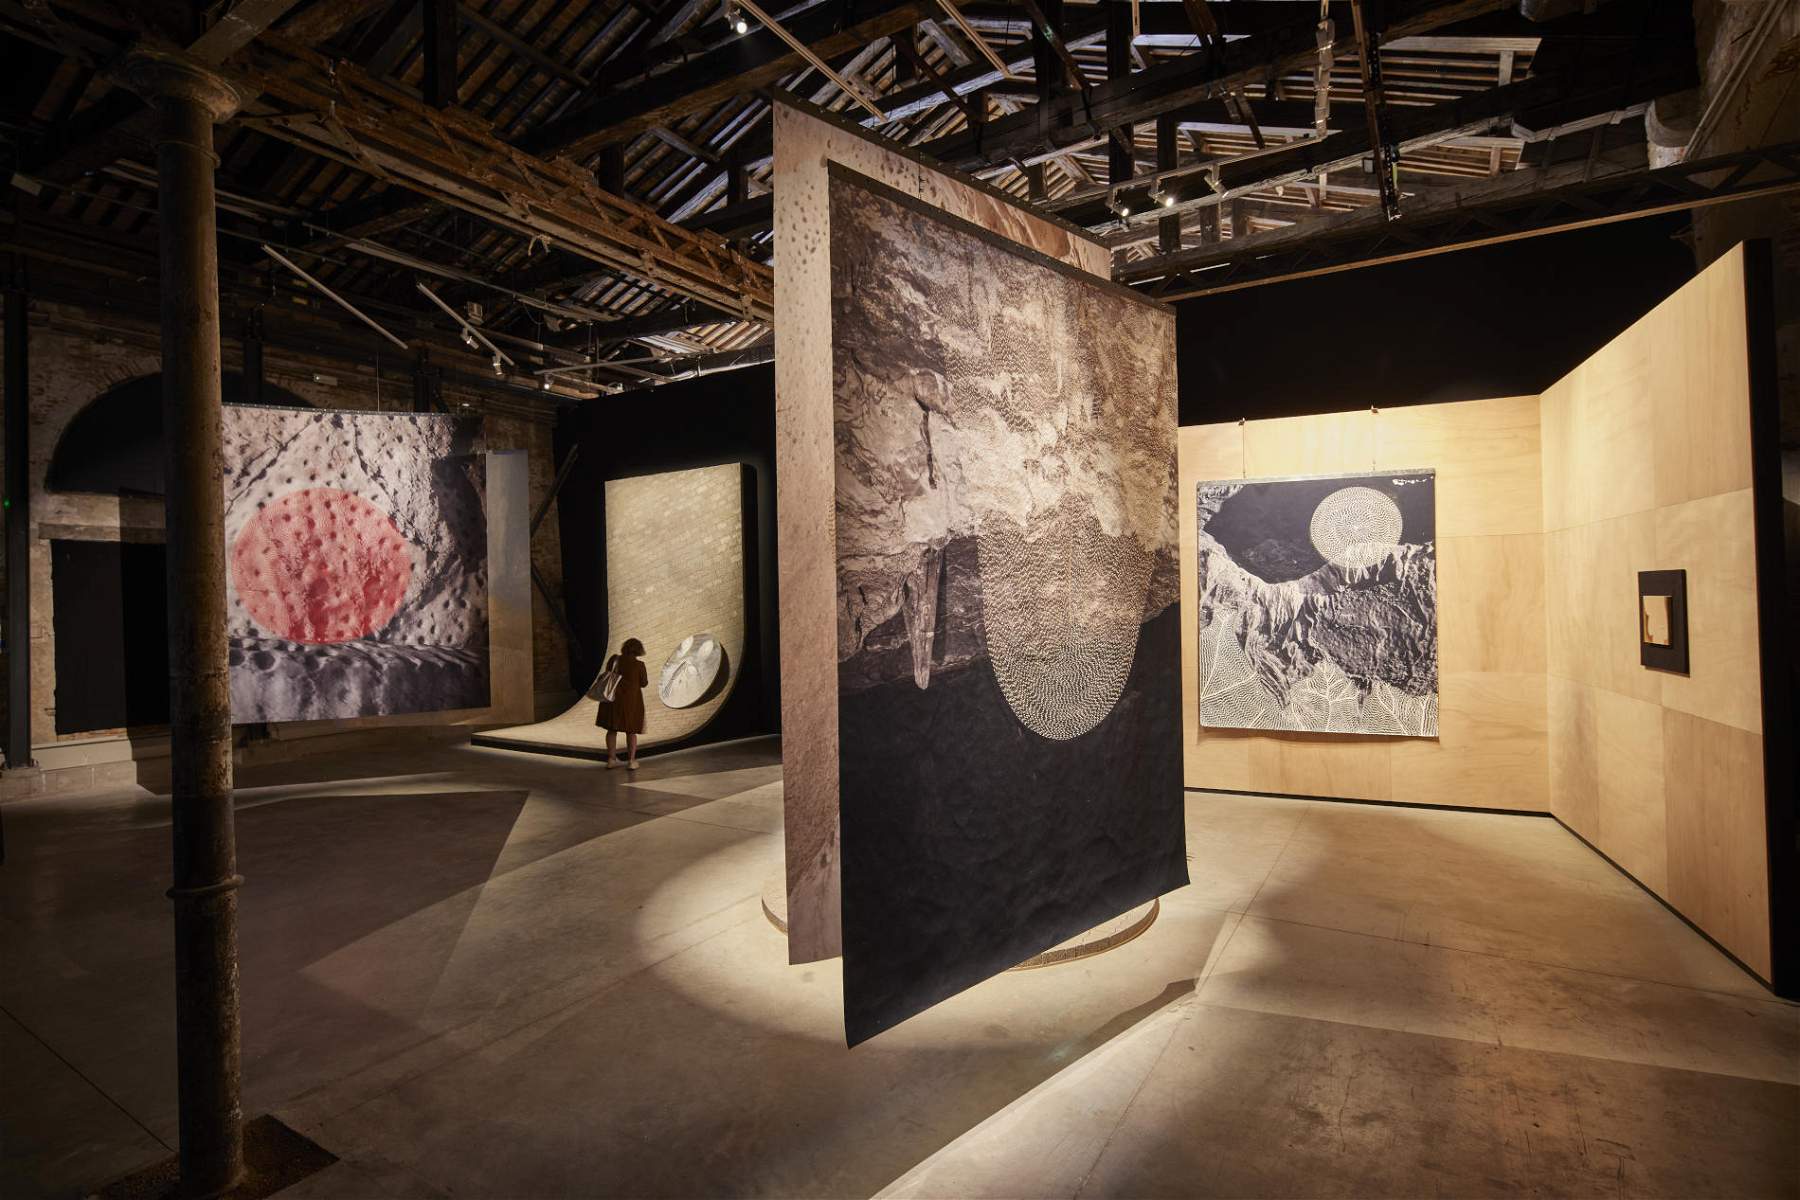 Oman's debut at the Venice Biennale. Works from three generations of artists on display